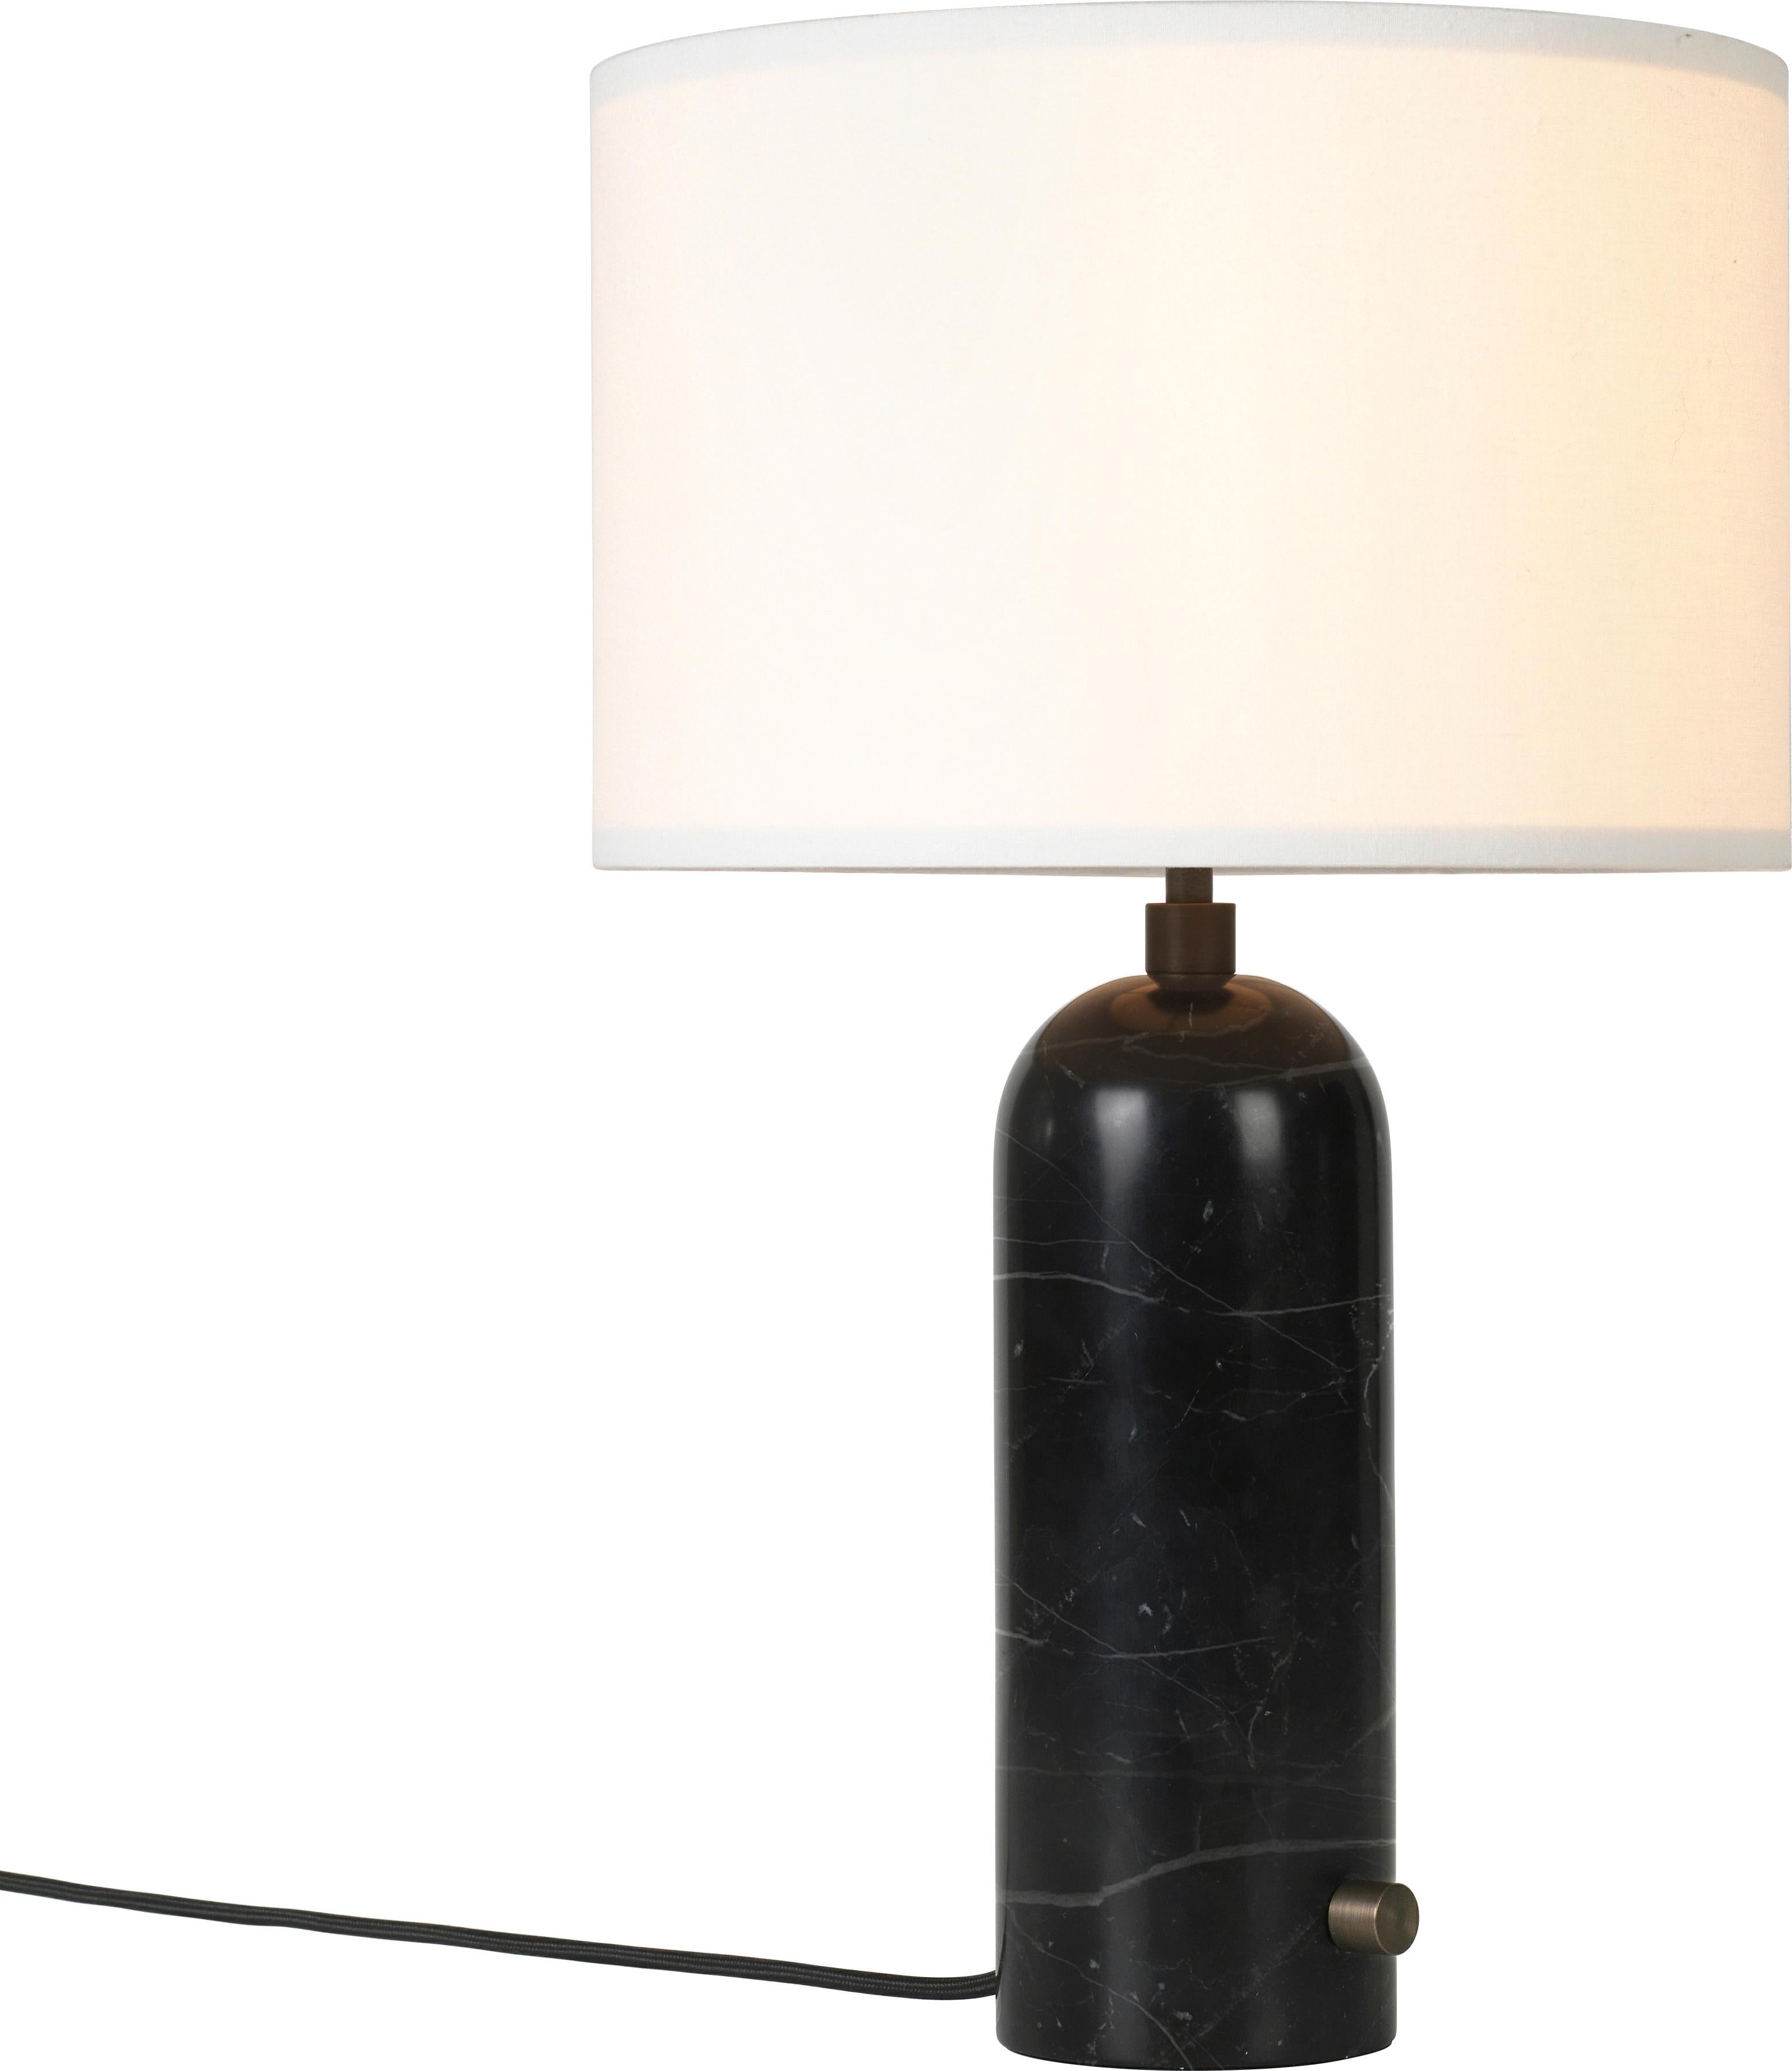 Large 'Gravity' Marble Table Lamp by Space Copenhagen for Gubi in Grey For Sale 12